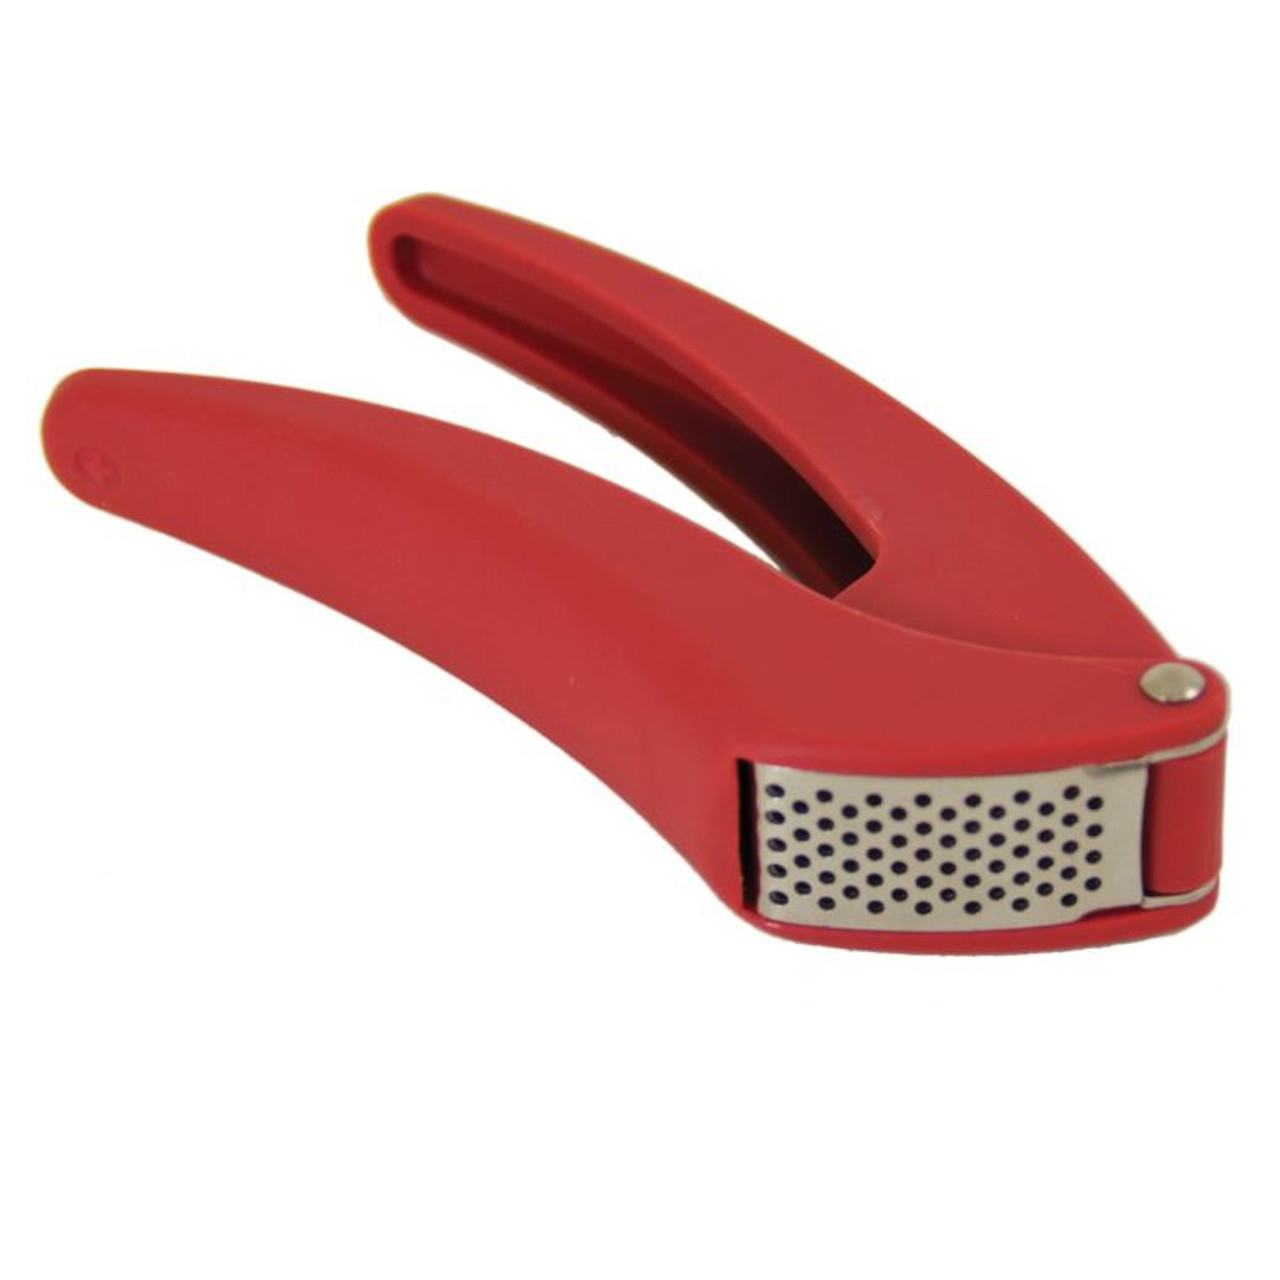 Easy Clean Garlic Press in RED - THE BEACH PLUM COMPANY